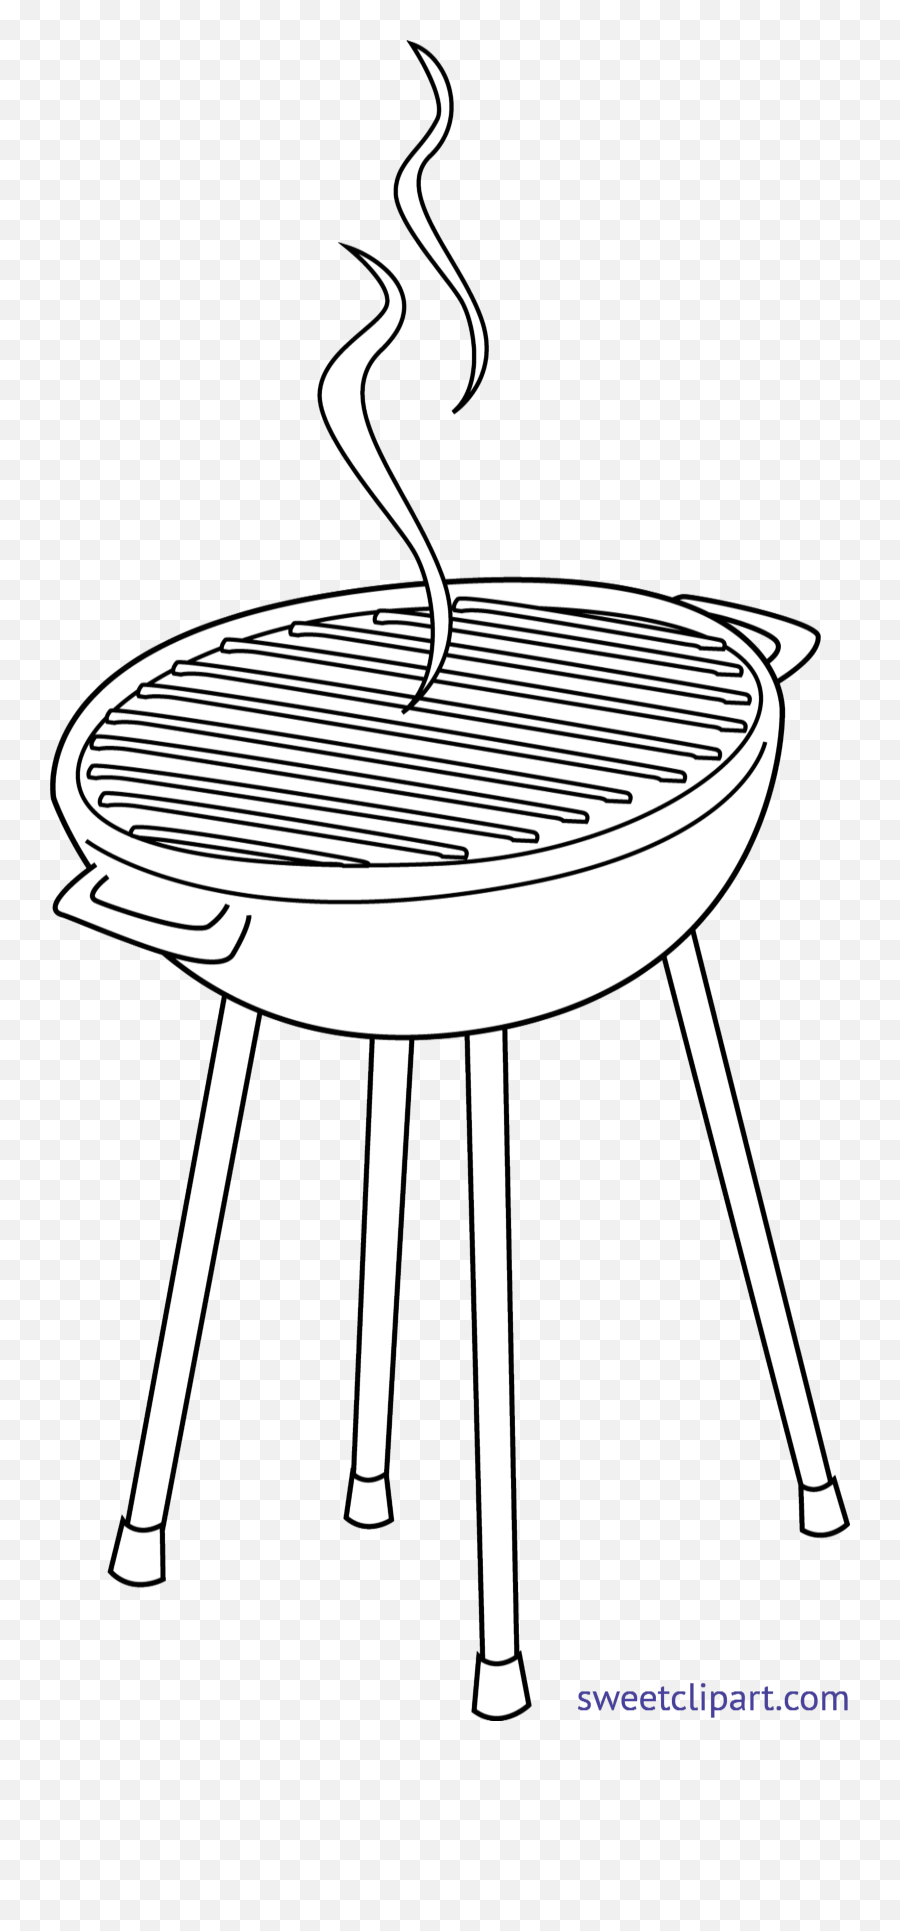 Download Svg Royalty Free Download Bbq - Grill Clip Art Emoji,Grill Clipart